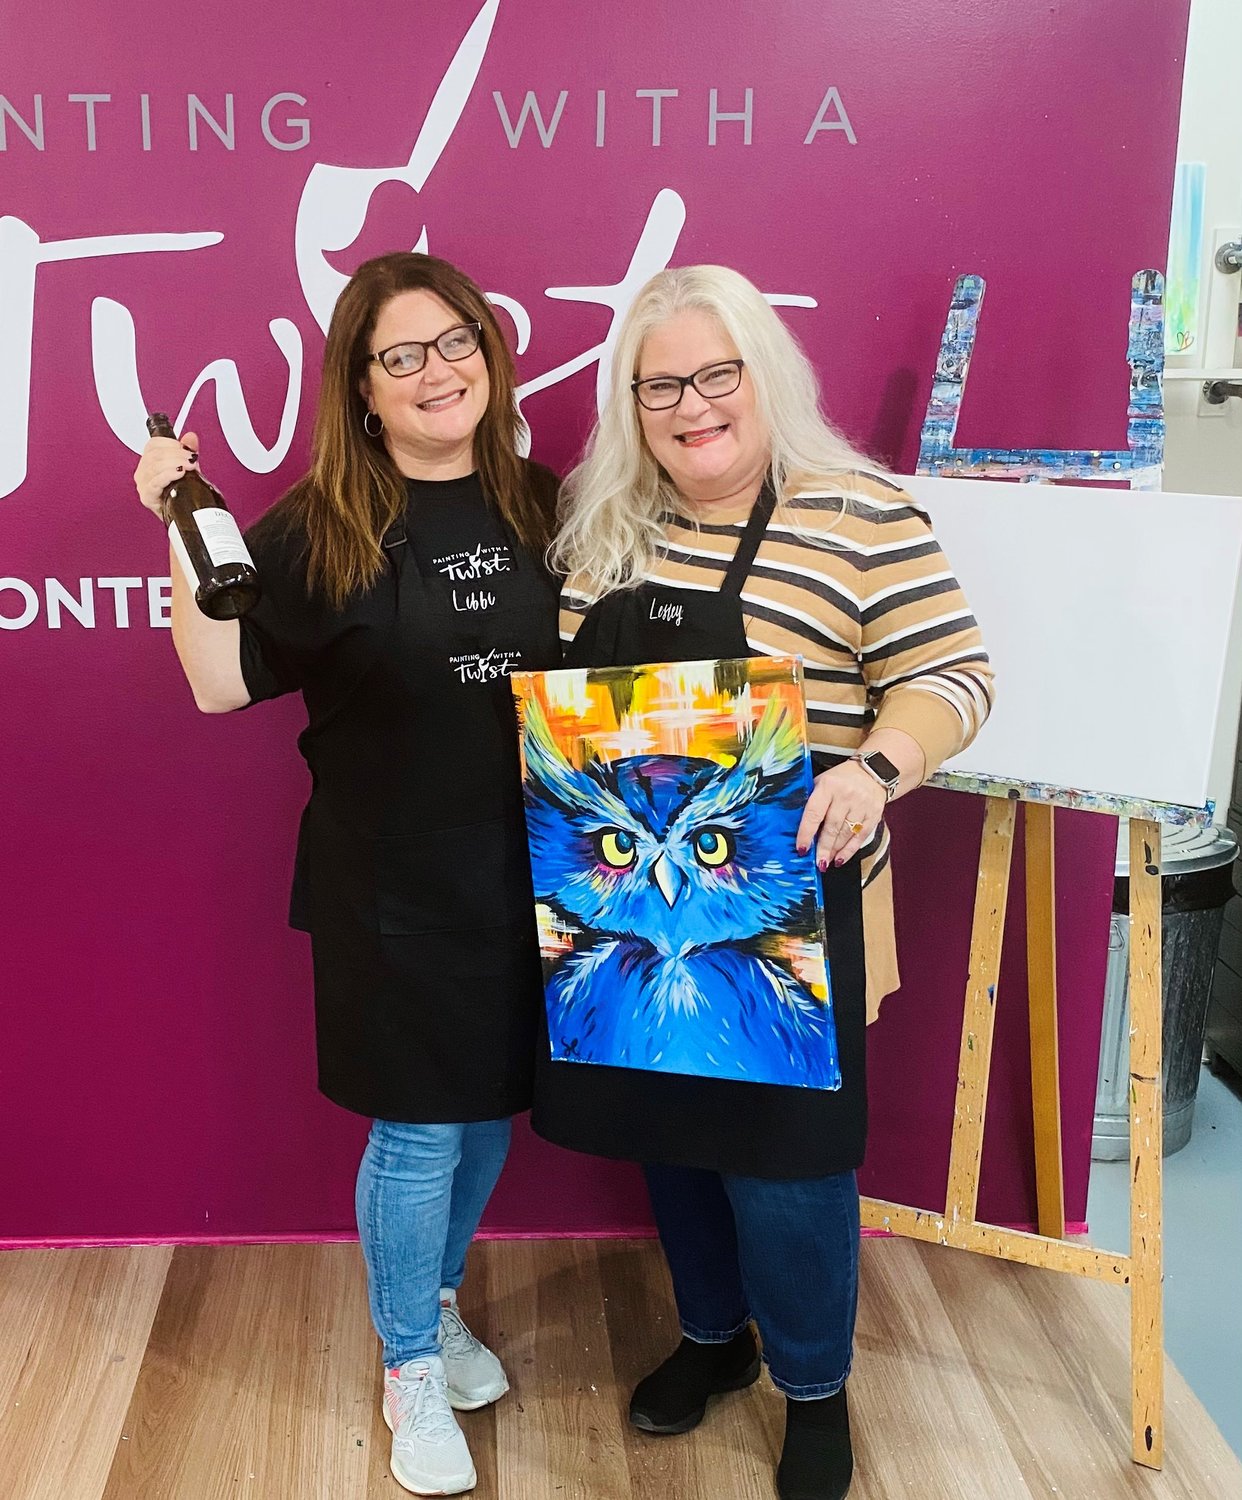 Libbi Vitel-Poole, left, and sister Lesley Vitel opened their first Painting With a Twist franchise in 2021. They have since added a second location.